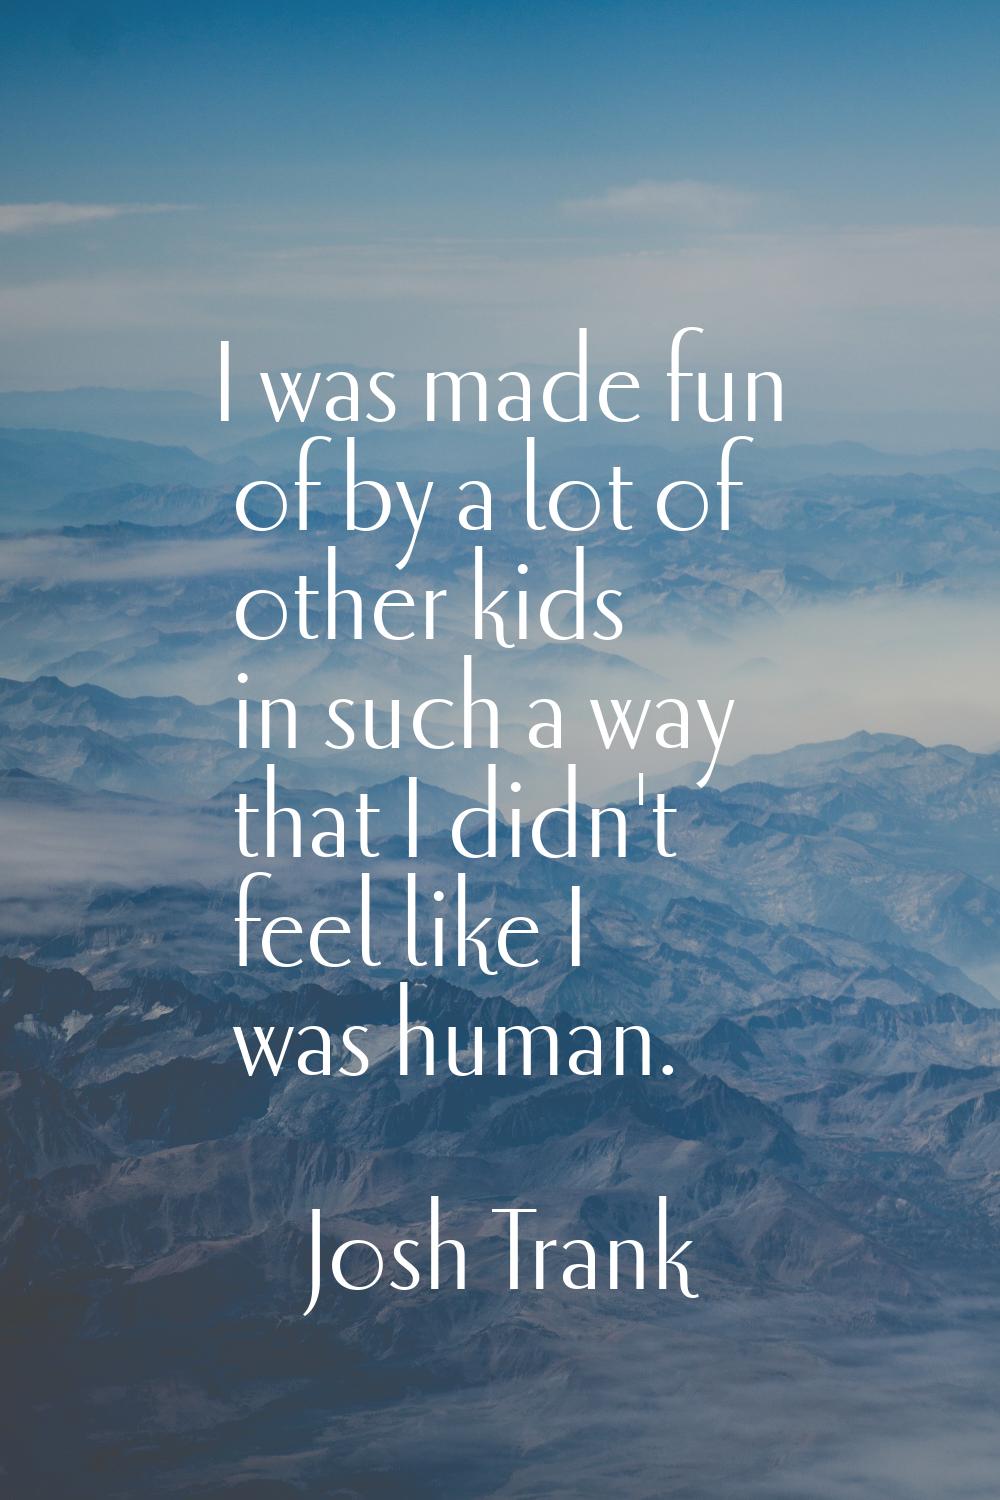 I was made fun of by a lot of other kids in such a way that I didn't feel like I was human.